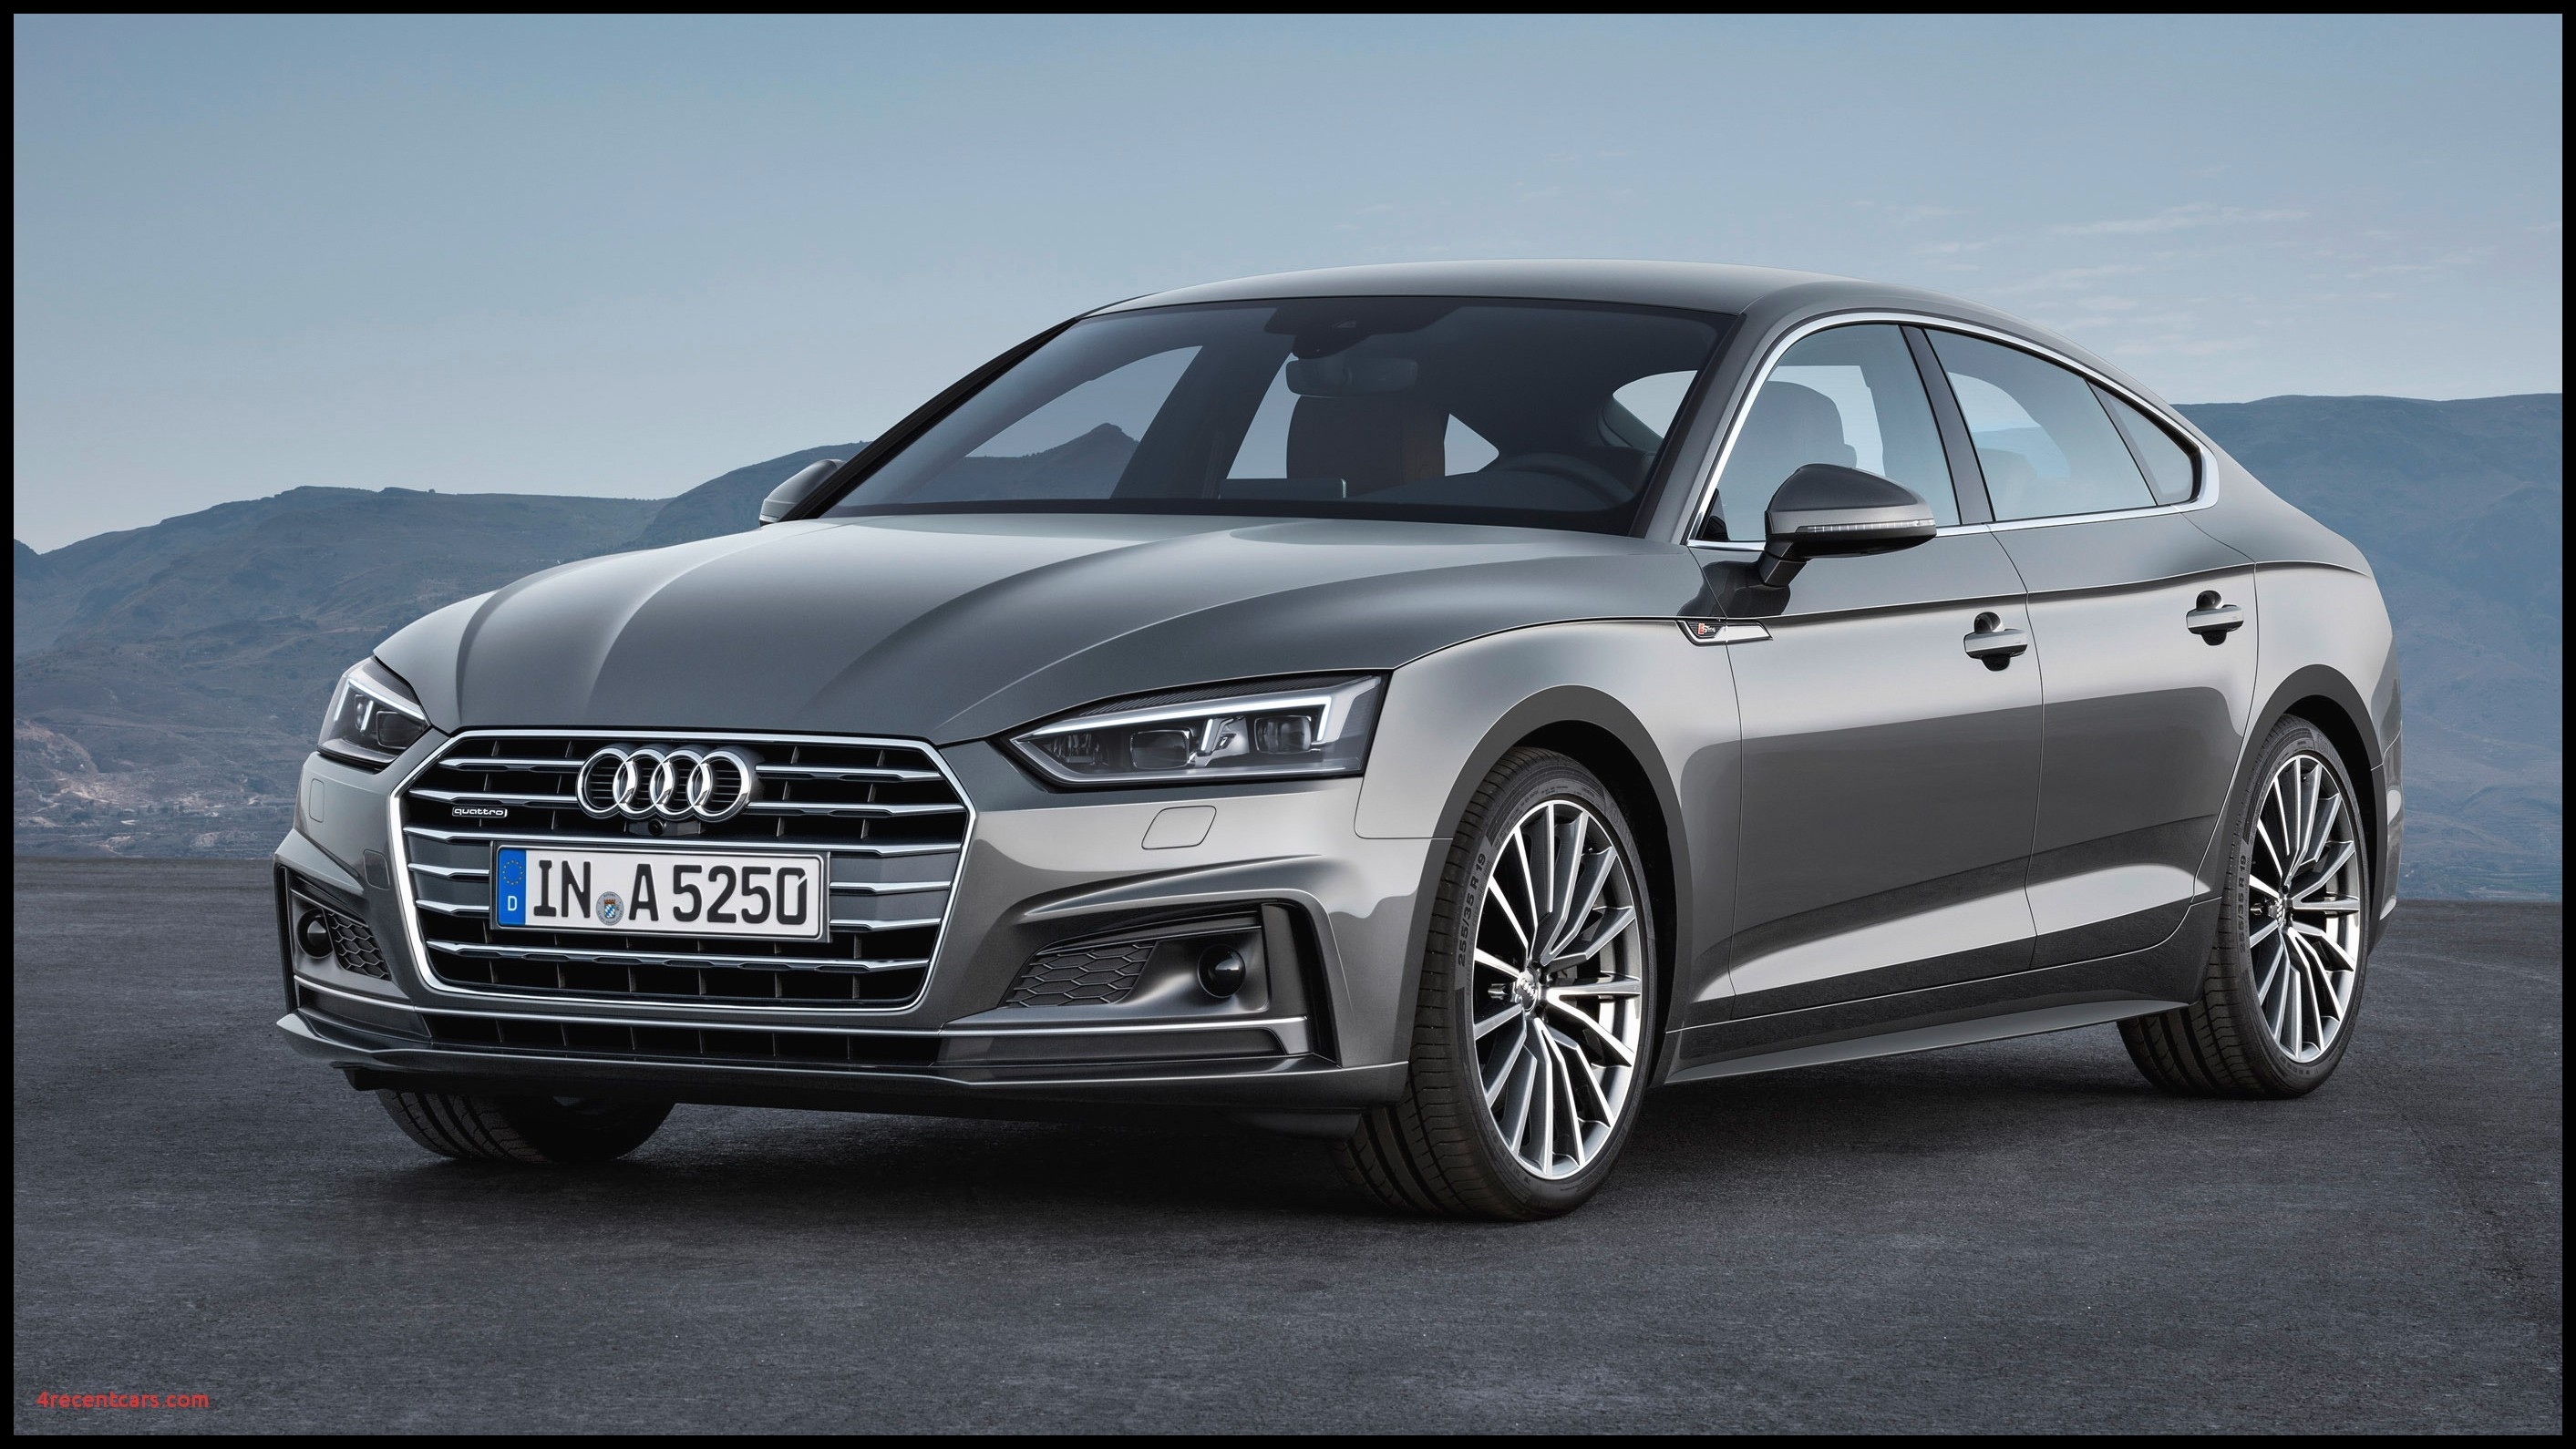 2018 Audi A5 Sportback Review and Specs Amazing Wallpapers Hd 4k Best Od Car Wallpaper Awesome